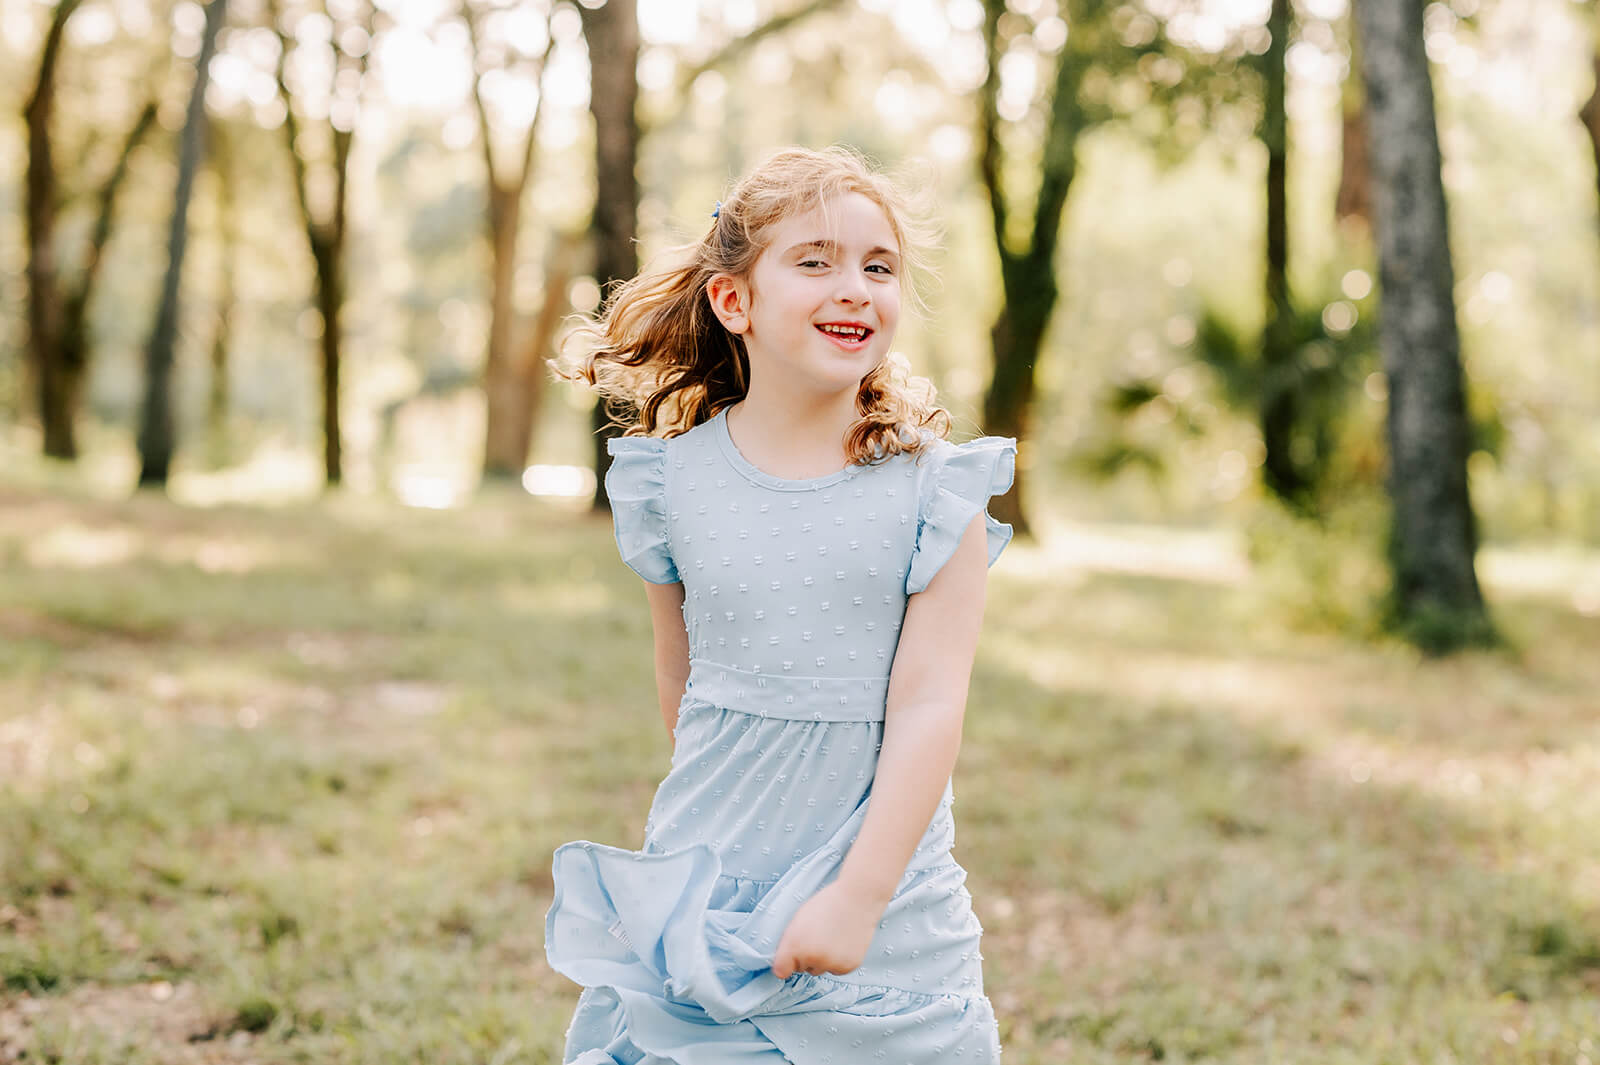 A young girl twirls in her blue dress while playing win a forest park after visiting pattywhacks